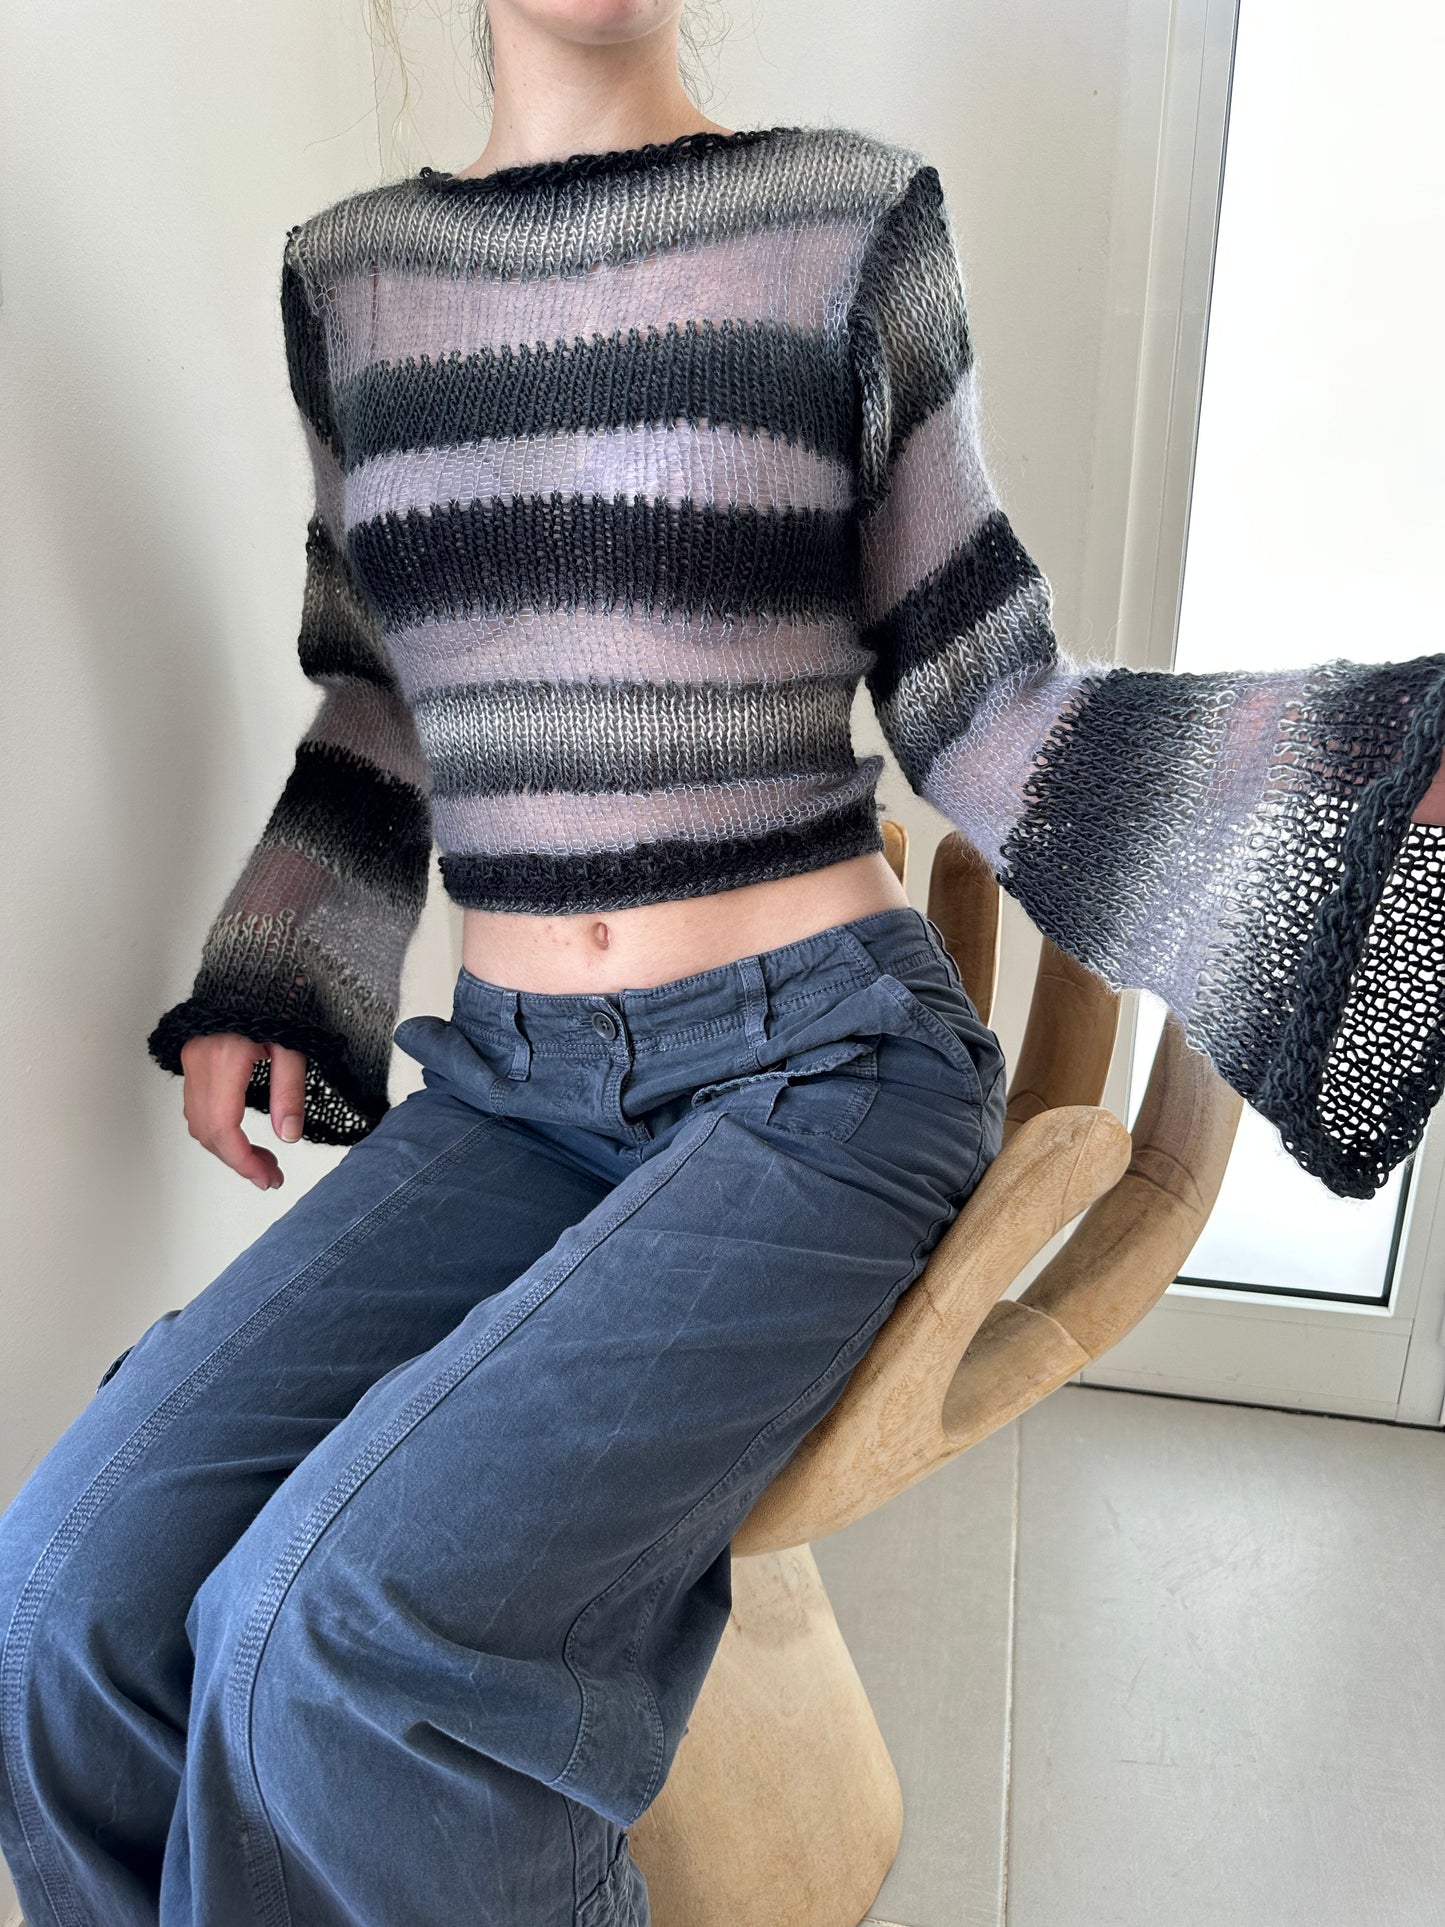 Handmade striped black and grey knitted mohair jumper with flared sleeves